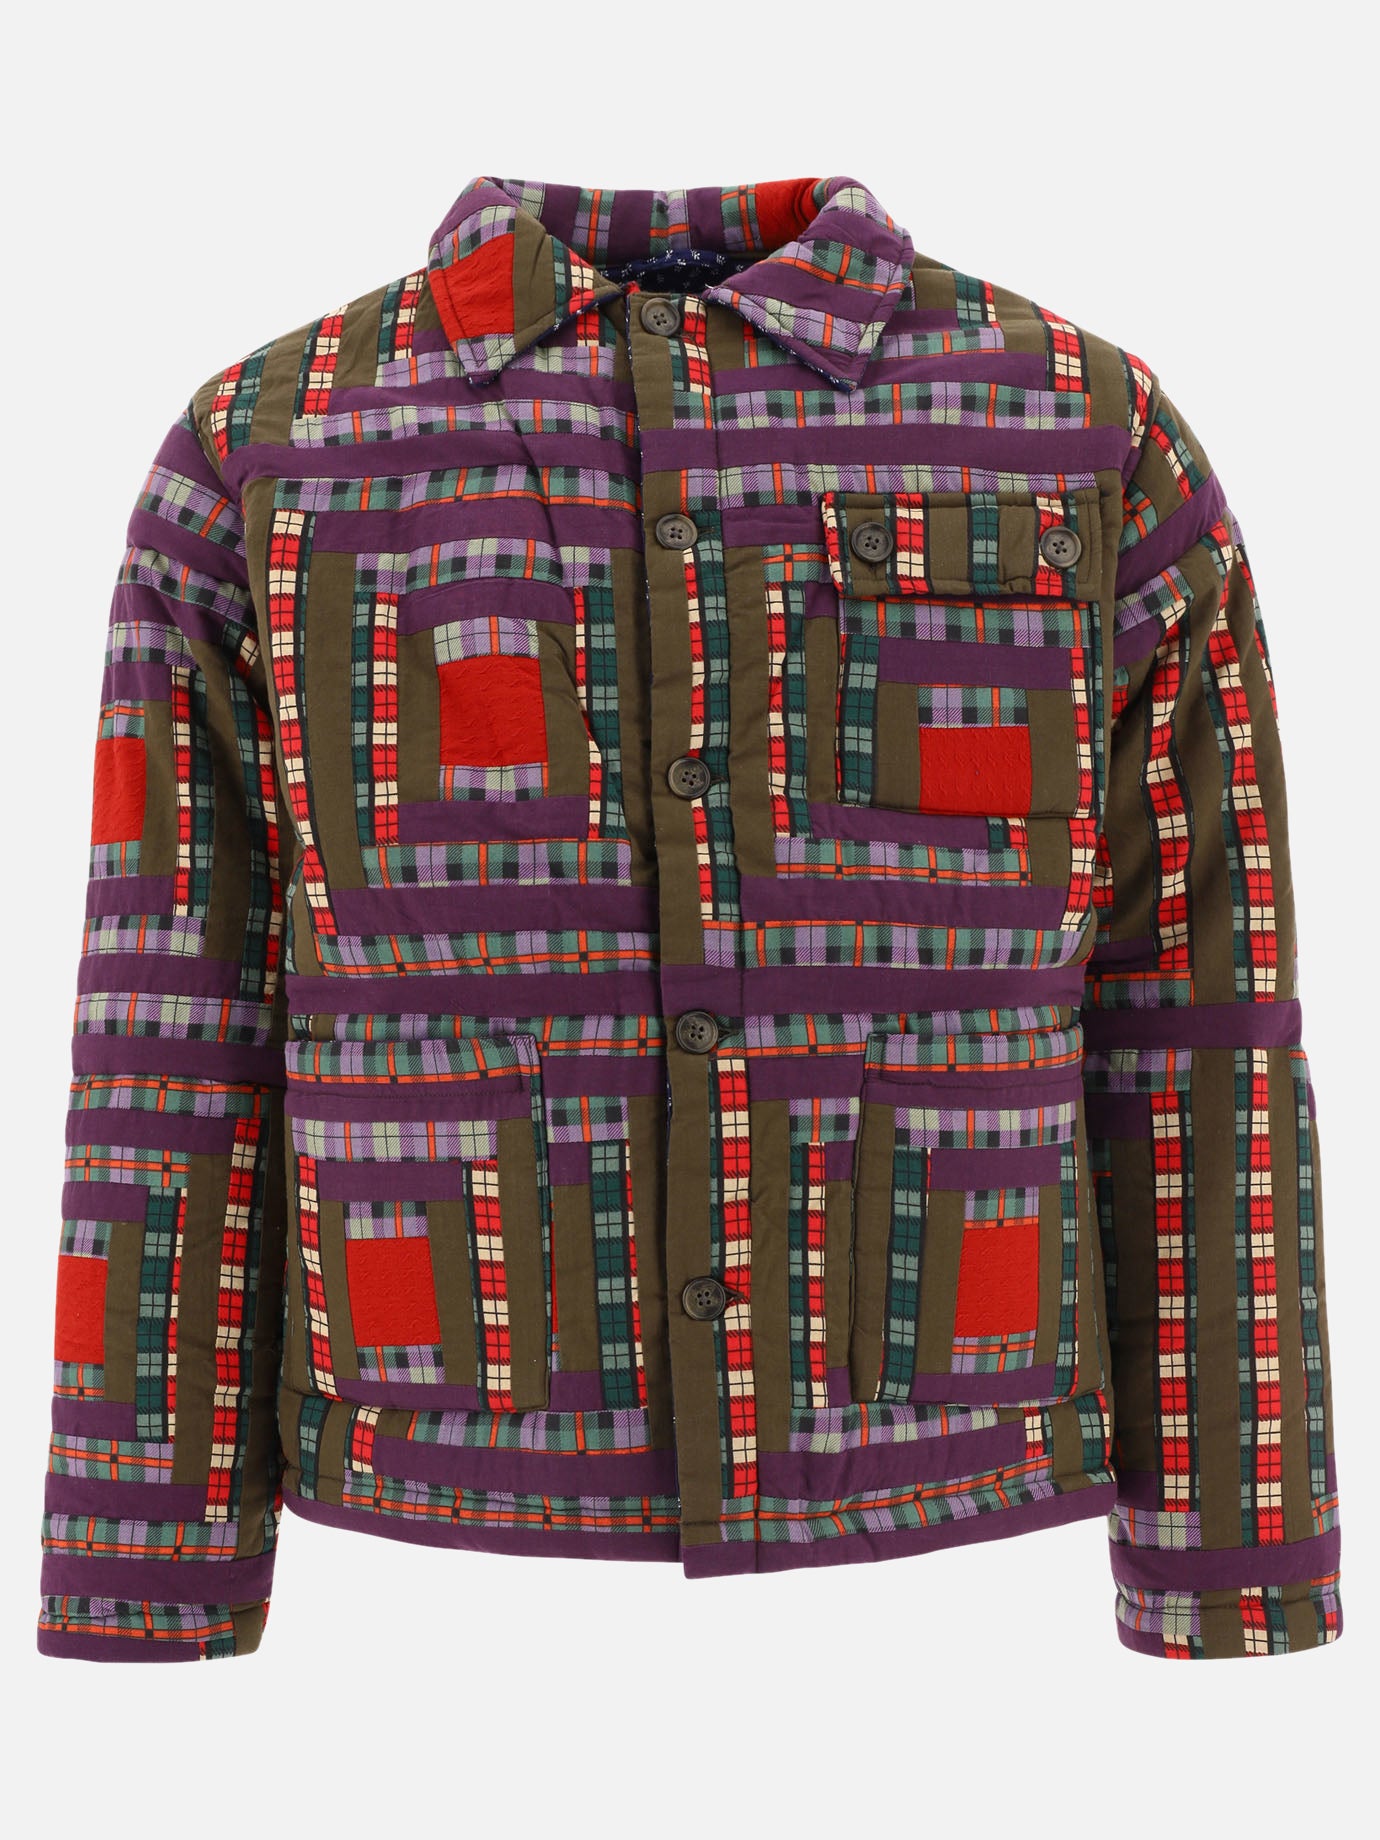 "Plaid Log Cabin" quilted jacket